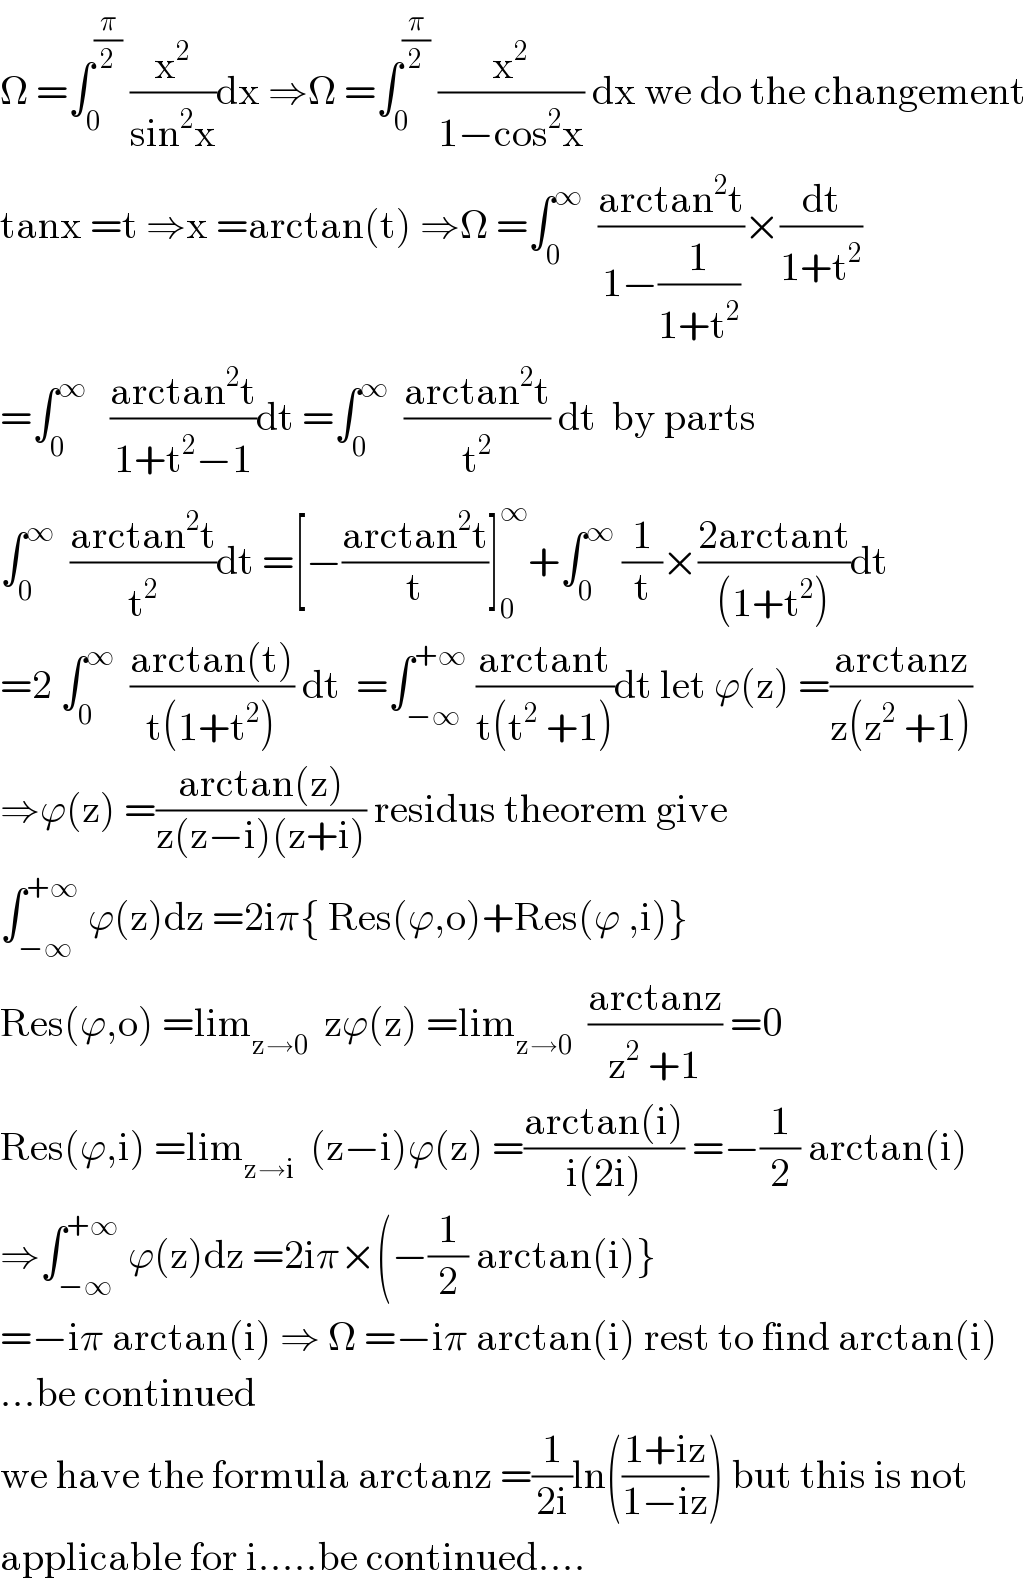 Ω =∫_0 ^(π/2)  (x^2 /(sin^2 x))dx ⇒Ω =∫_0 ^(π/2)  (x^2 /(1−cos^2 x)) dx we do the changement  tanx =t ⇒x =arctan(t) ⇒Ω =∫_0 ^∞   ((arctan^2 t)/(1−(1/(1+t^2 ))))×(dt/(1+t^2 ))  =∫_0 ^∞    ((arctan^2 t)/(1+t^2 −1))dt =∫_0 ^∞   ((arctan^2 t)/t^2 ) dt  by parts  ∫_0 ^∞   ((arctan^2 t)/t^2 )dt =[−((arctan^2 t)/t)]_0 ^∞ +∫_0 ^∞  (1/t)×((2arctant)/((1+t^2 )))dt  =2 ∫_0 ^∞   ((arctan(t))/(t(1+t^2 ))) dt  =∫_(−∞) ^(+∞)  ((arctant)/(t(t^2  +1)))dt let ϕ(z) =((arctanz)/(z(z^2  +1)))  ⇒ϕ(z) =((arctan(z))/(z(z−i)(z+i))) residus theorem give  ∫_(−∞) ^(+∞)  ϕ(z)dz =2iπ{ Res(ϕ,o)+Res(ϕ ,i)}  Res(ϕ,o) =lim_(z→0)   zϕ(z) =lim_(z→0)   ((arctanz)/(z^2  +1)) =0  Res(ϕ,i) =lim_(z→i)   (z−i)ϕ(z) =((arctan(i))/(i(2i))) =−(1/2) arctan(i)  ⇒∫_(−∞) ^(+∞)  ϕ(z)dz =2iπ×(−(1/2) arctan(i)}  =−iπ arctan(i) ⇒ Ω =−iπ arctan(i) rest to find arctan(i)  ...be continued  we have the formula arctanz =(1/(2i))ln(((1+iz)/(1−iz))) but this is not  applicable for i.....be continued....  